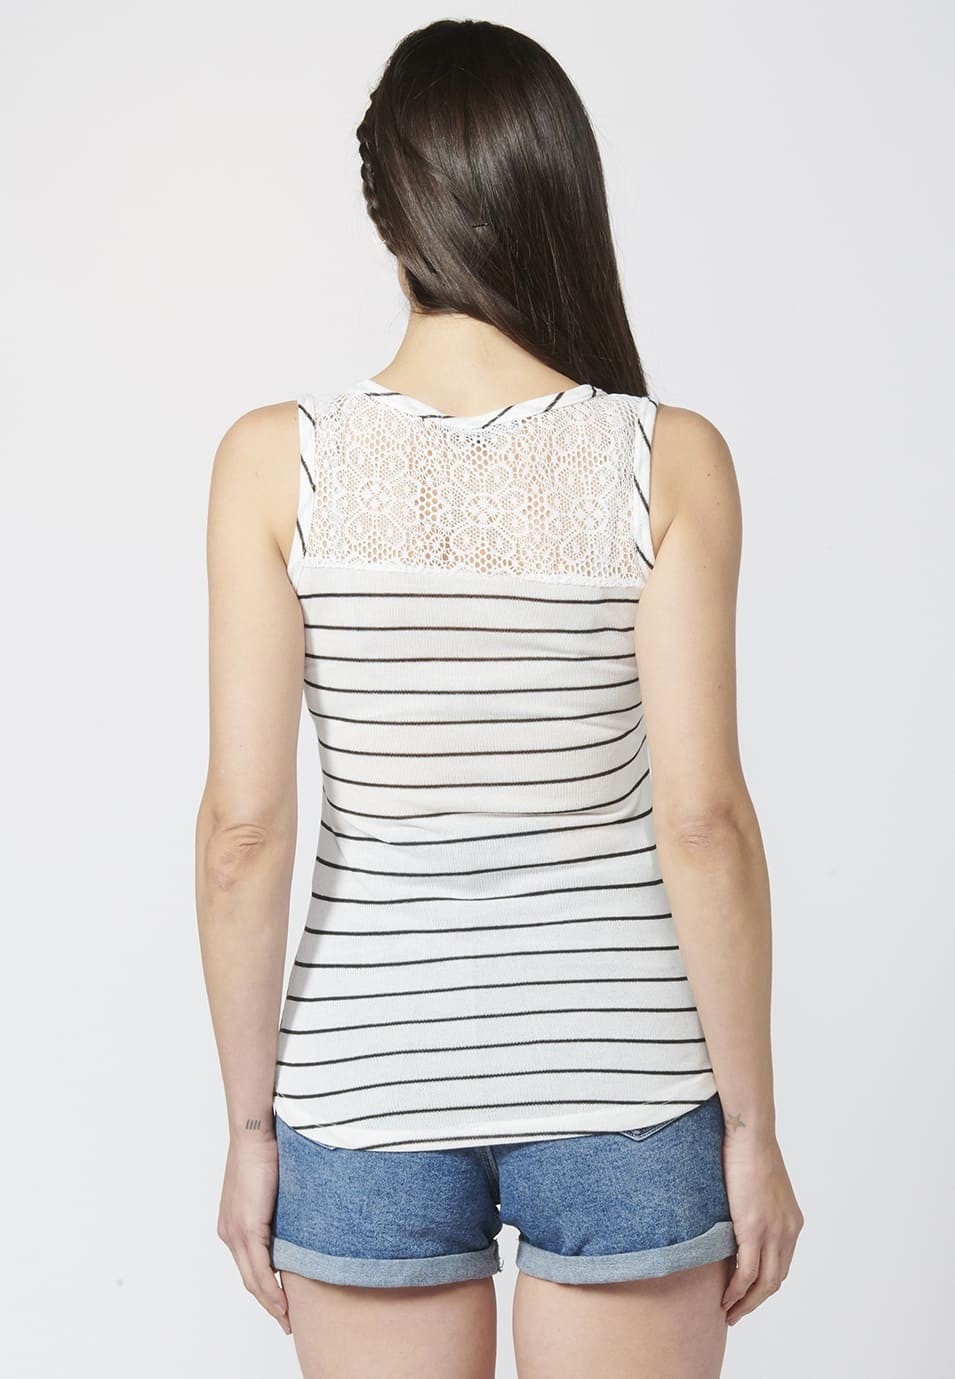 Tank Top with Round Neckline and Knitted Lace with Floral Print for Woman in White color 2